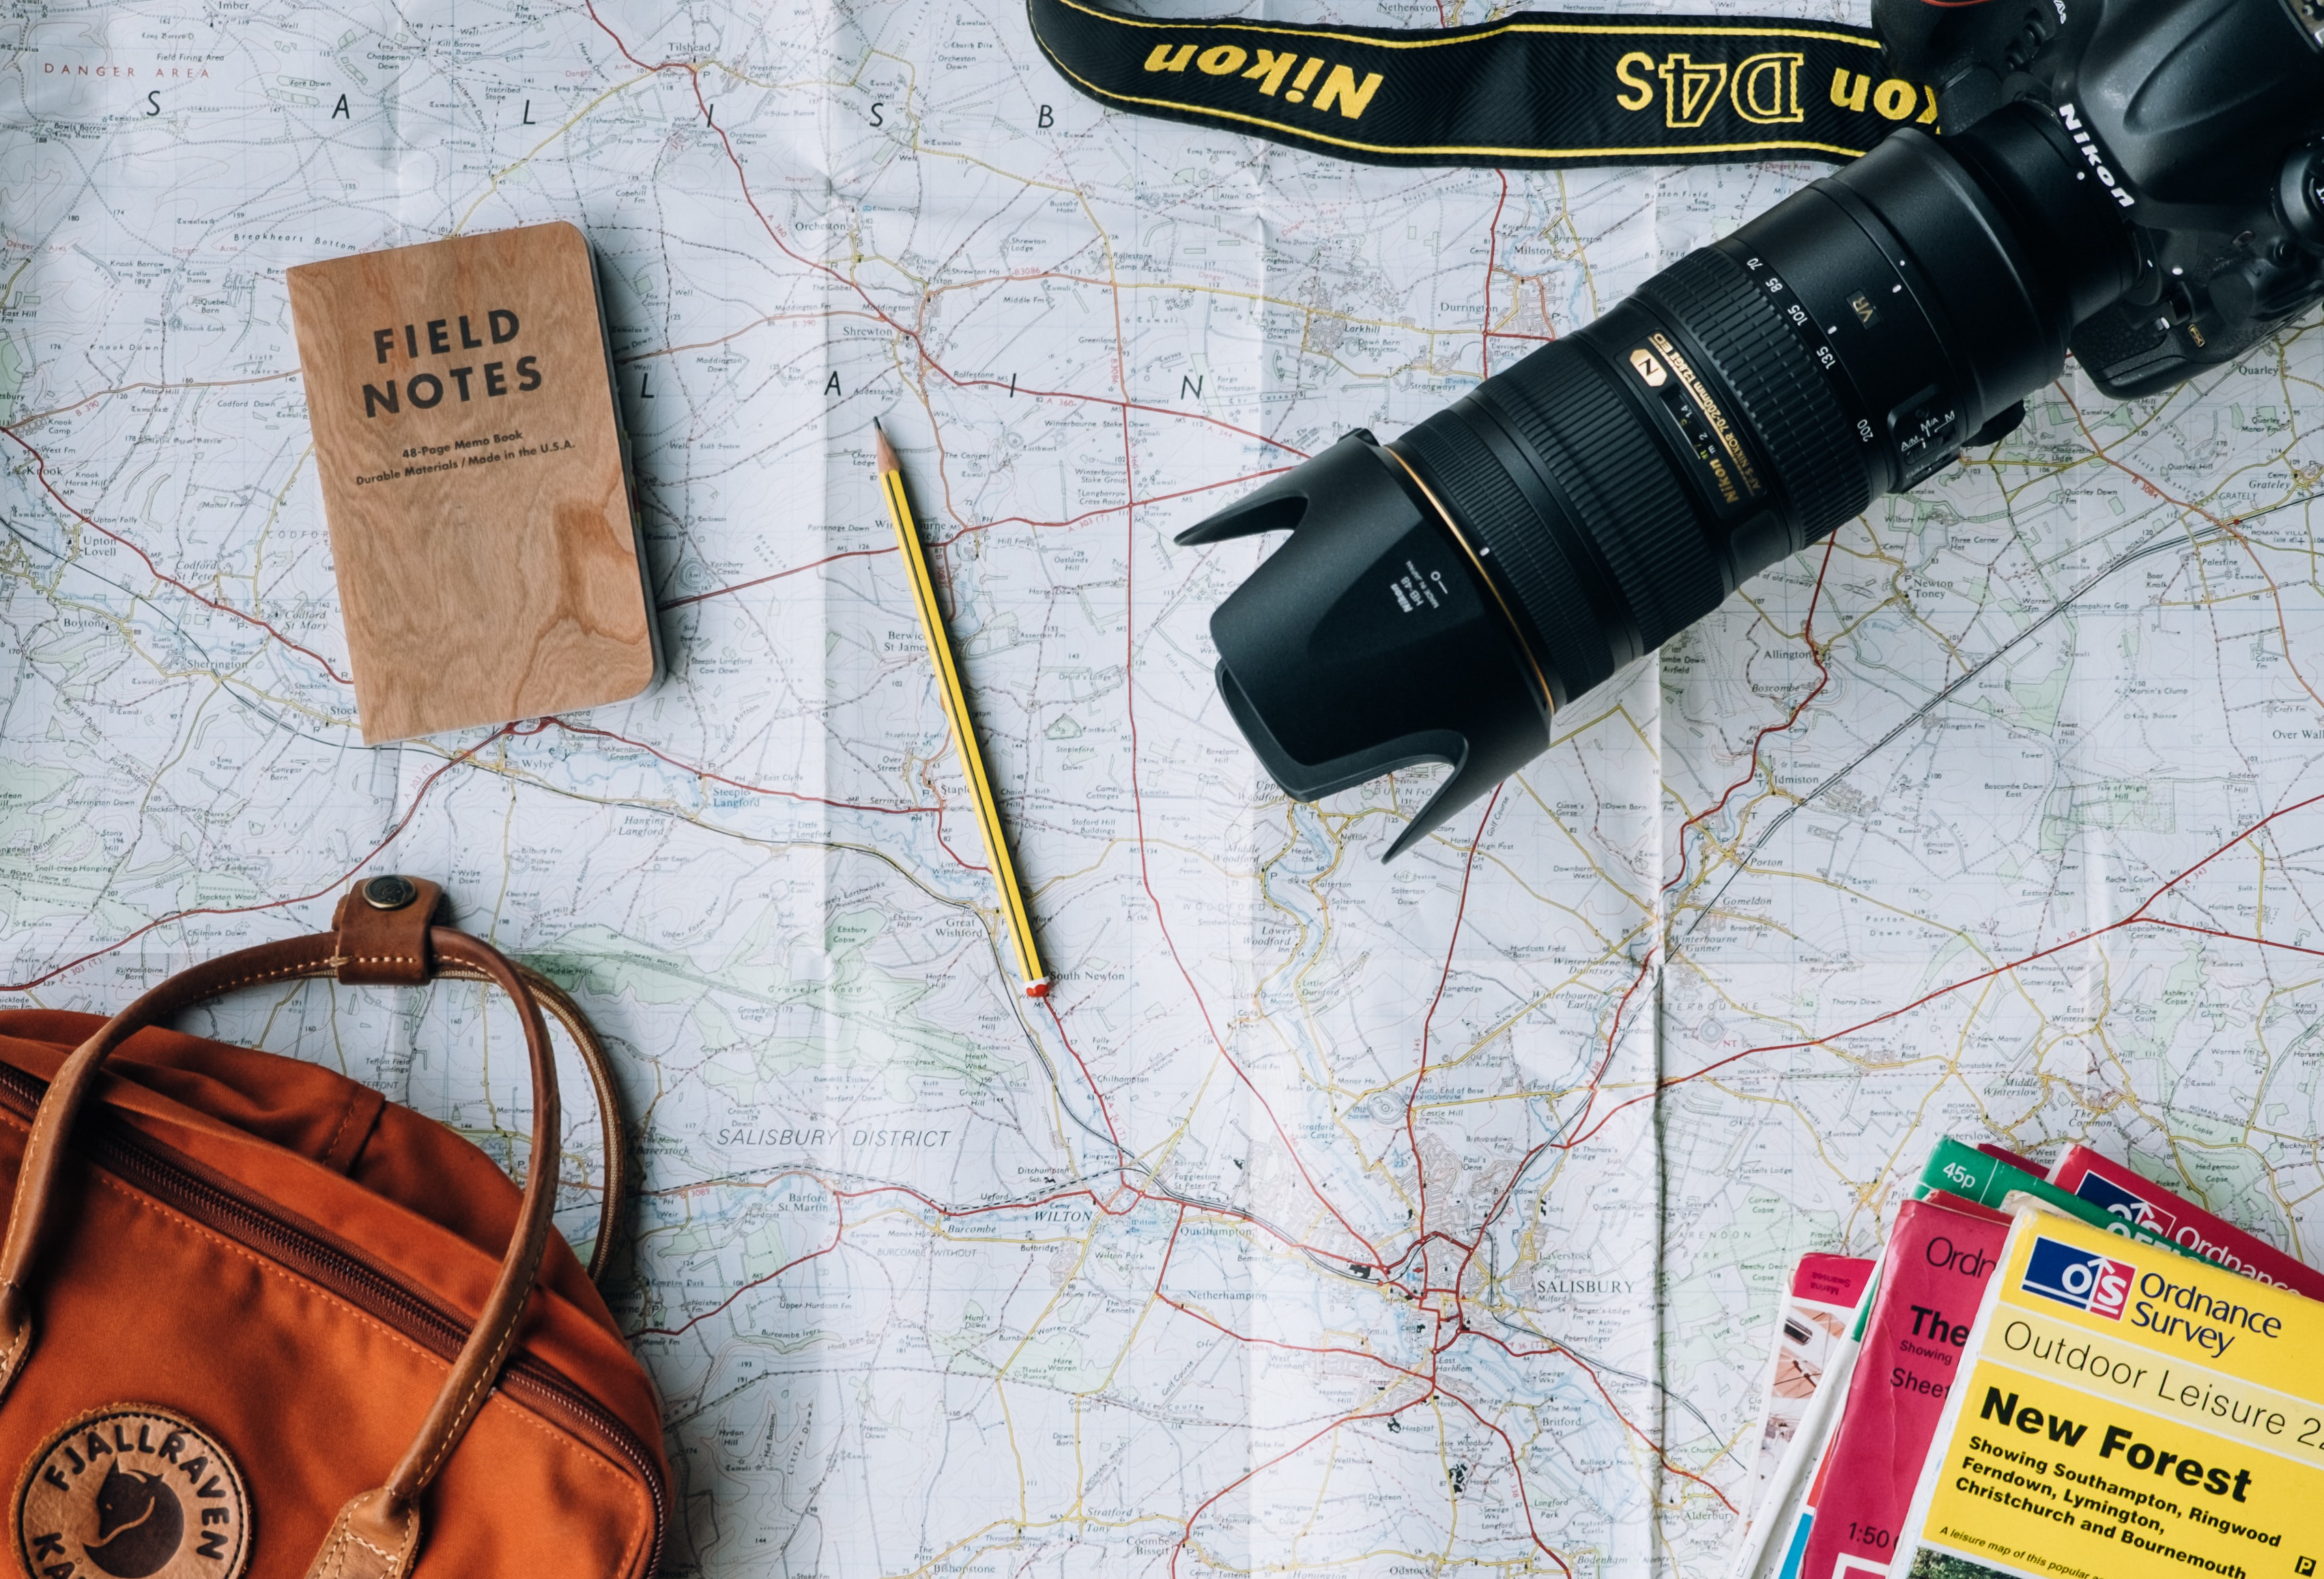 A Nikon camera with a zoom lens, a pencil and a field notebook, a guidebook and a travel bag are strewn across a printed map on a table. This photograph was taken by Annie Spratt.